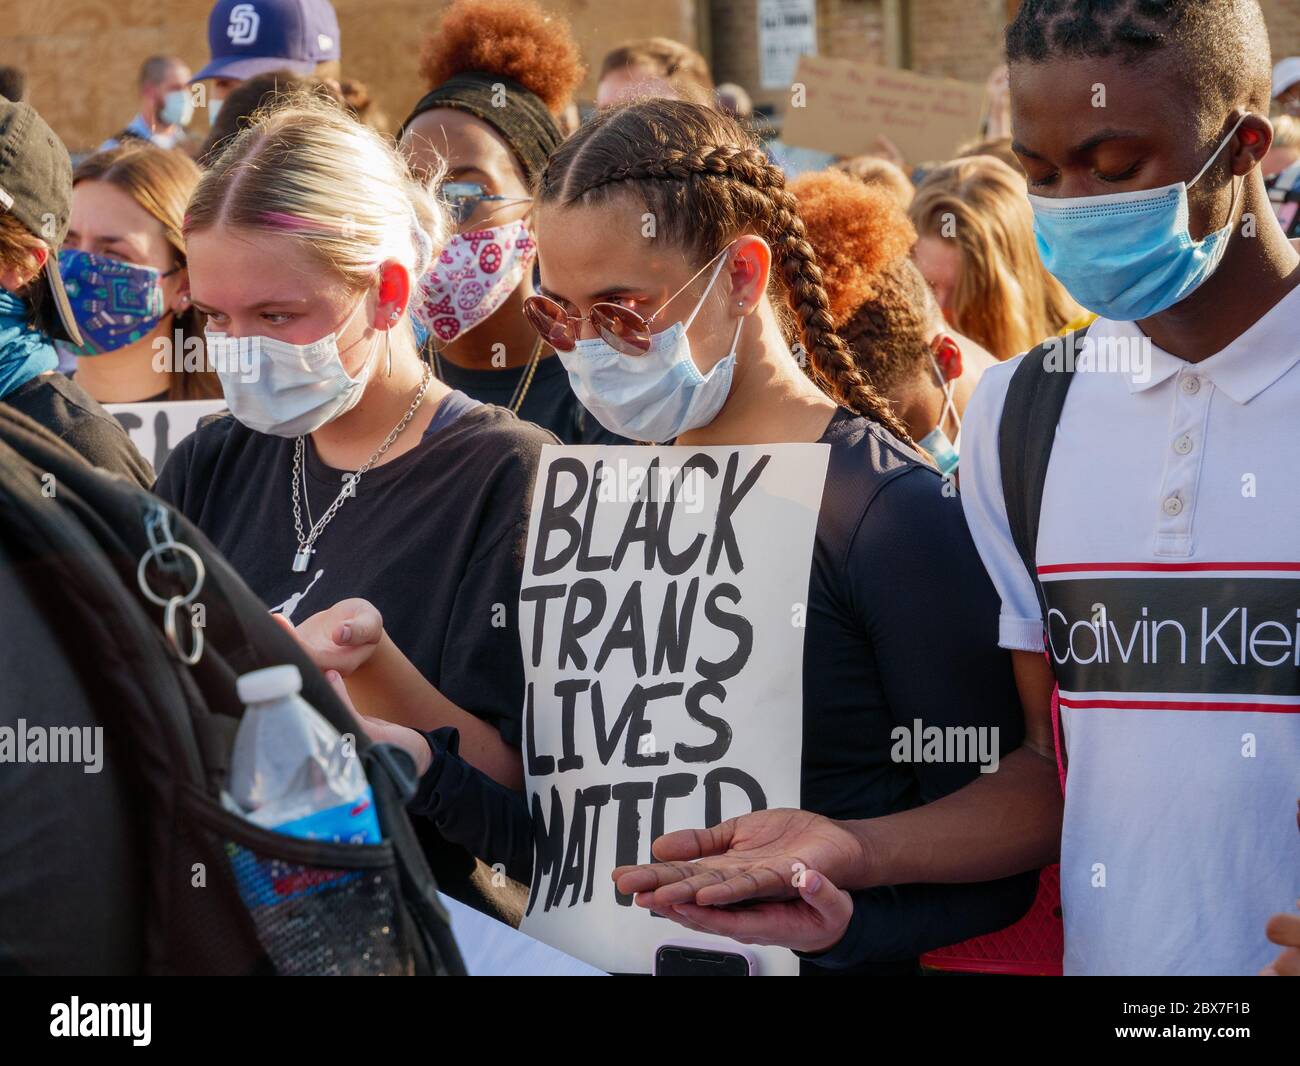 Oak Park, Illinois, USA. 4th June 2020. Protesters observe a moment of silence for George Floyd at rally at Madison and Central in Chicago. A diverse crowd of protesters marched from Oak Park Village Hall to the 15th District police station in Chicago and on to Central and Madison. Stock Photo